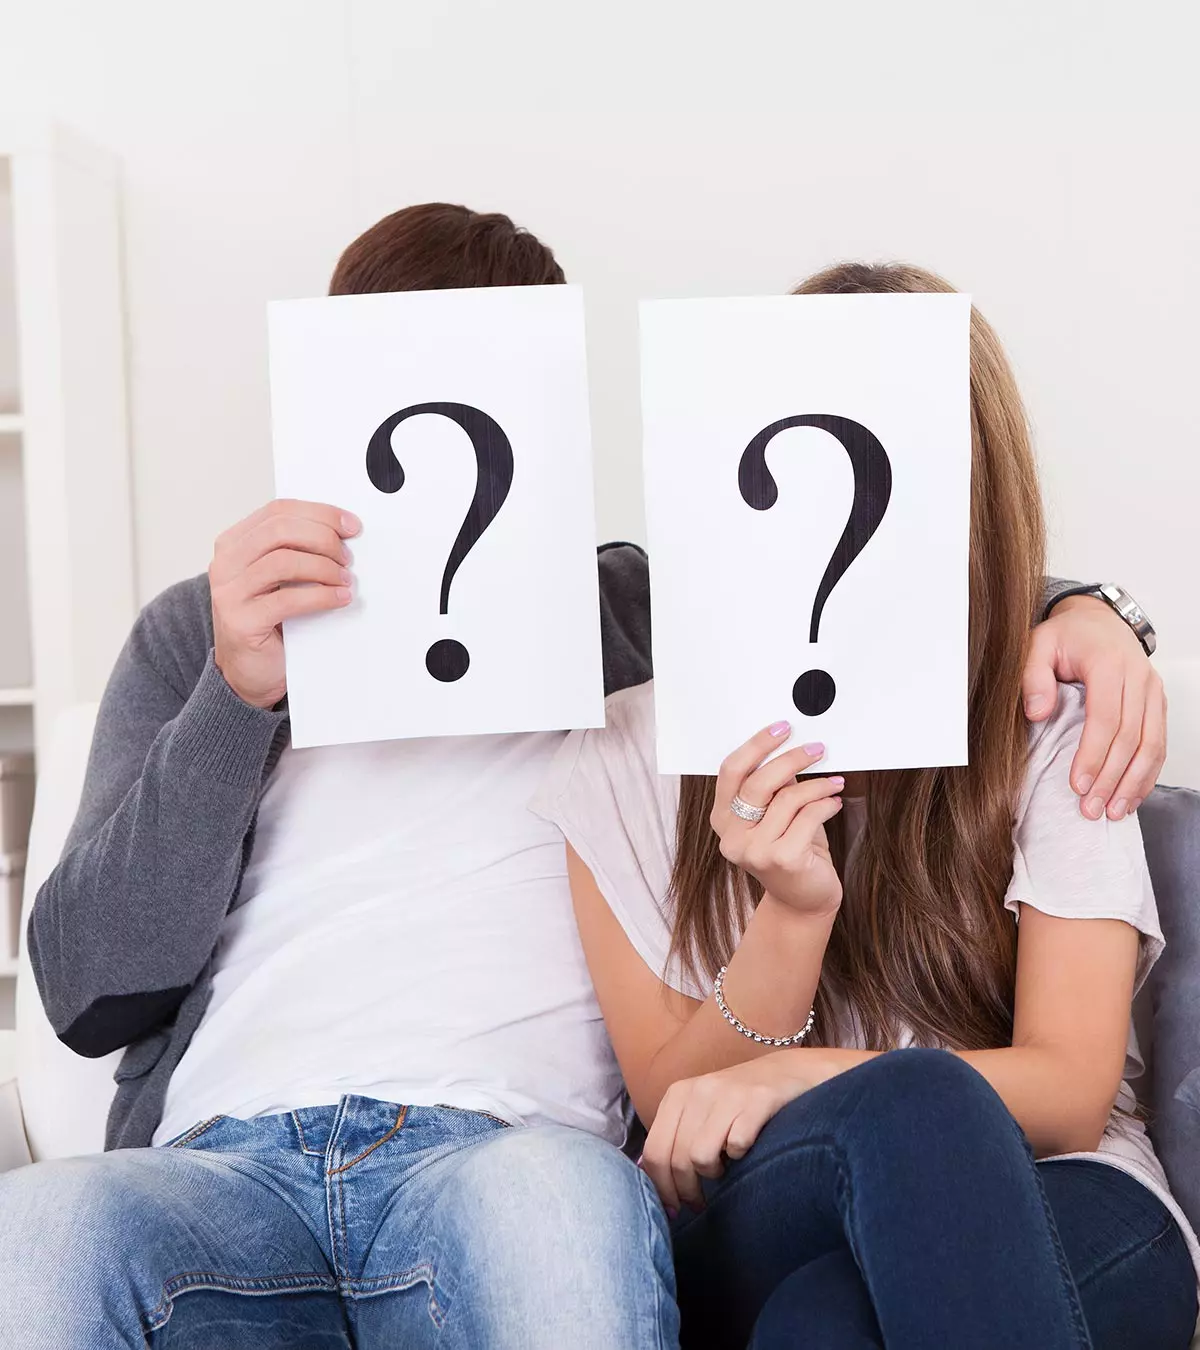 100 Intimate Funny And Curious Questions To Ask Your Partner